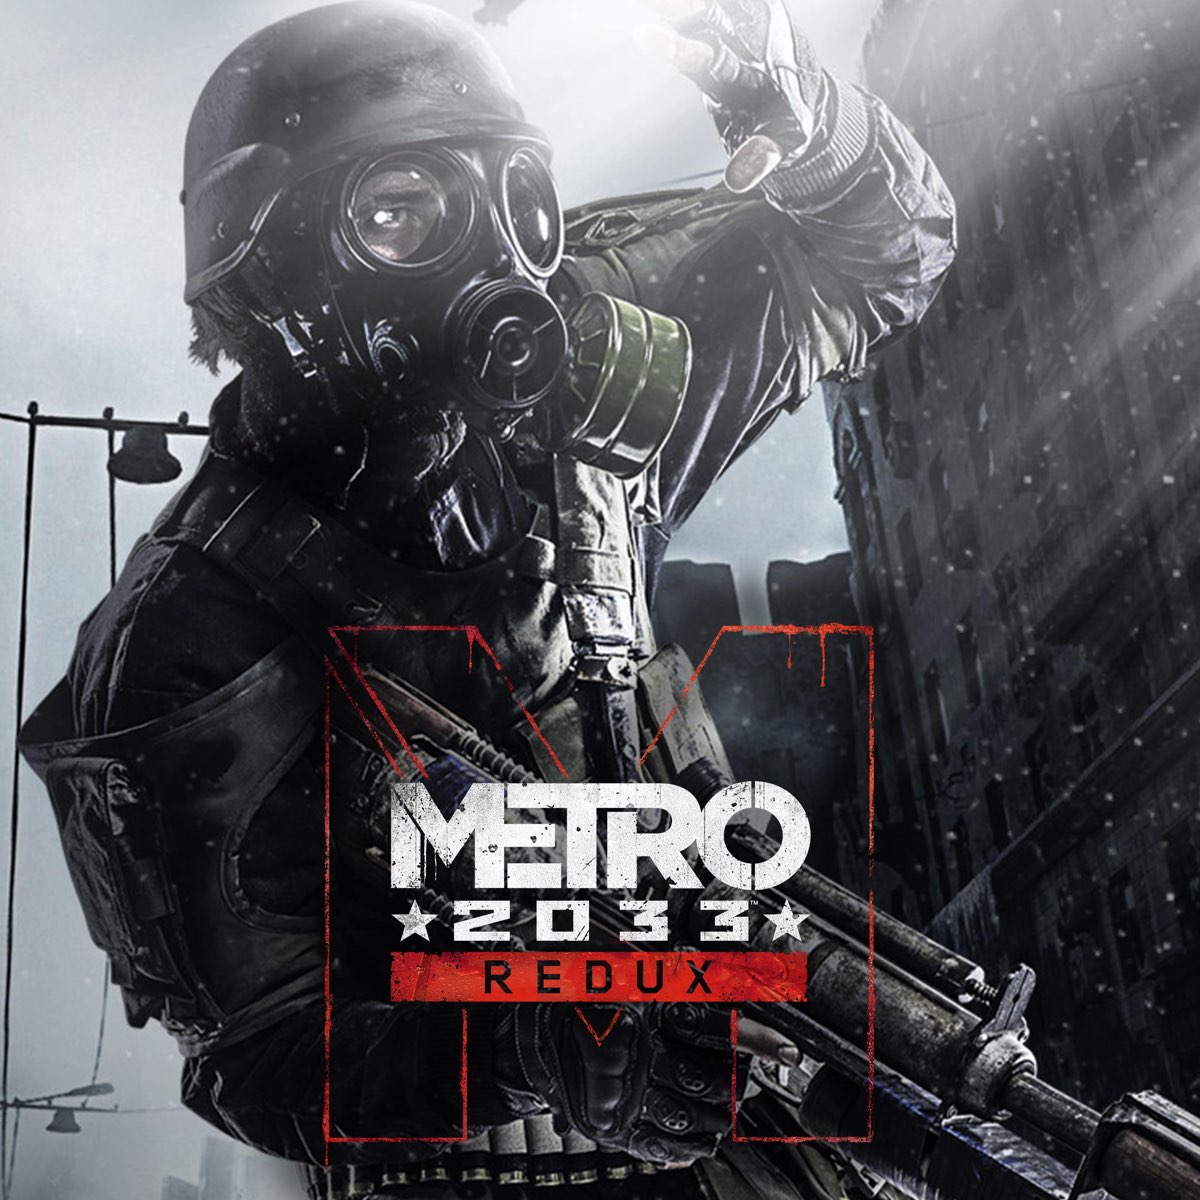 Metro 2033 (Official Soundtrack) - Album by Alexey Omelchuk - Apple Music